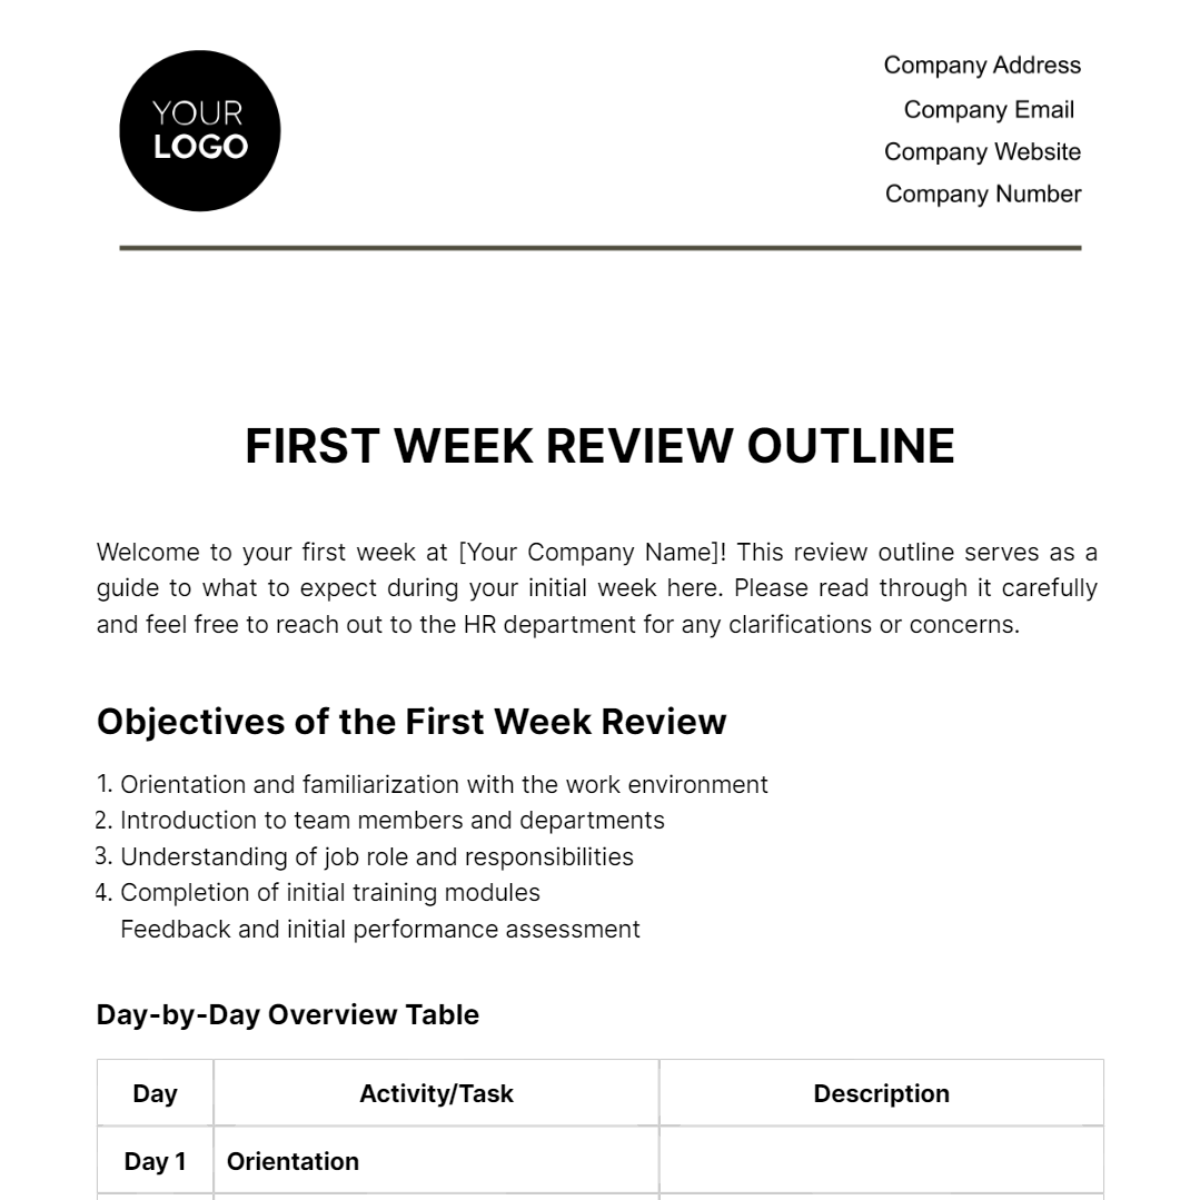 Free First Week Review Outline HR Template